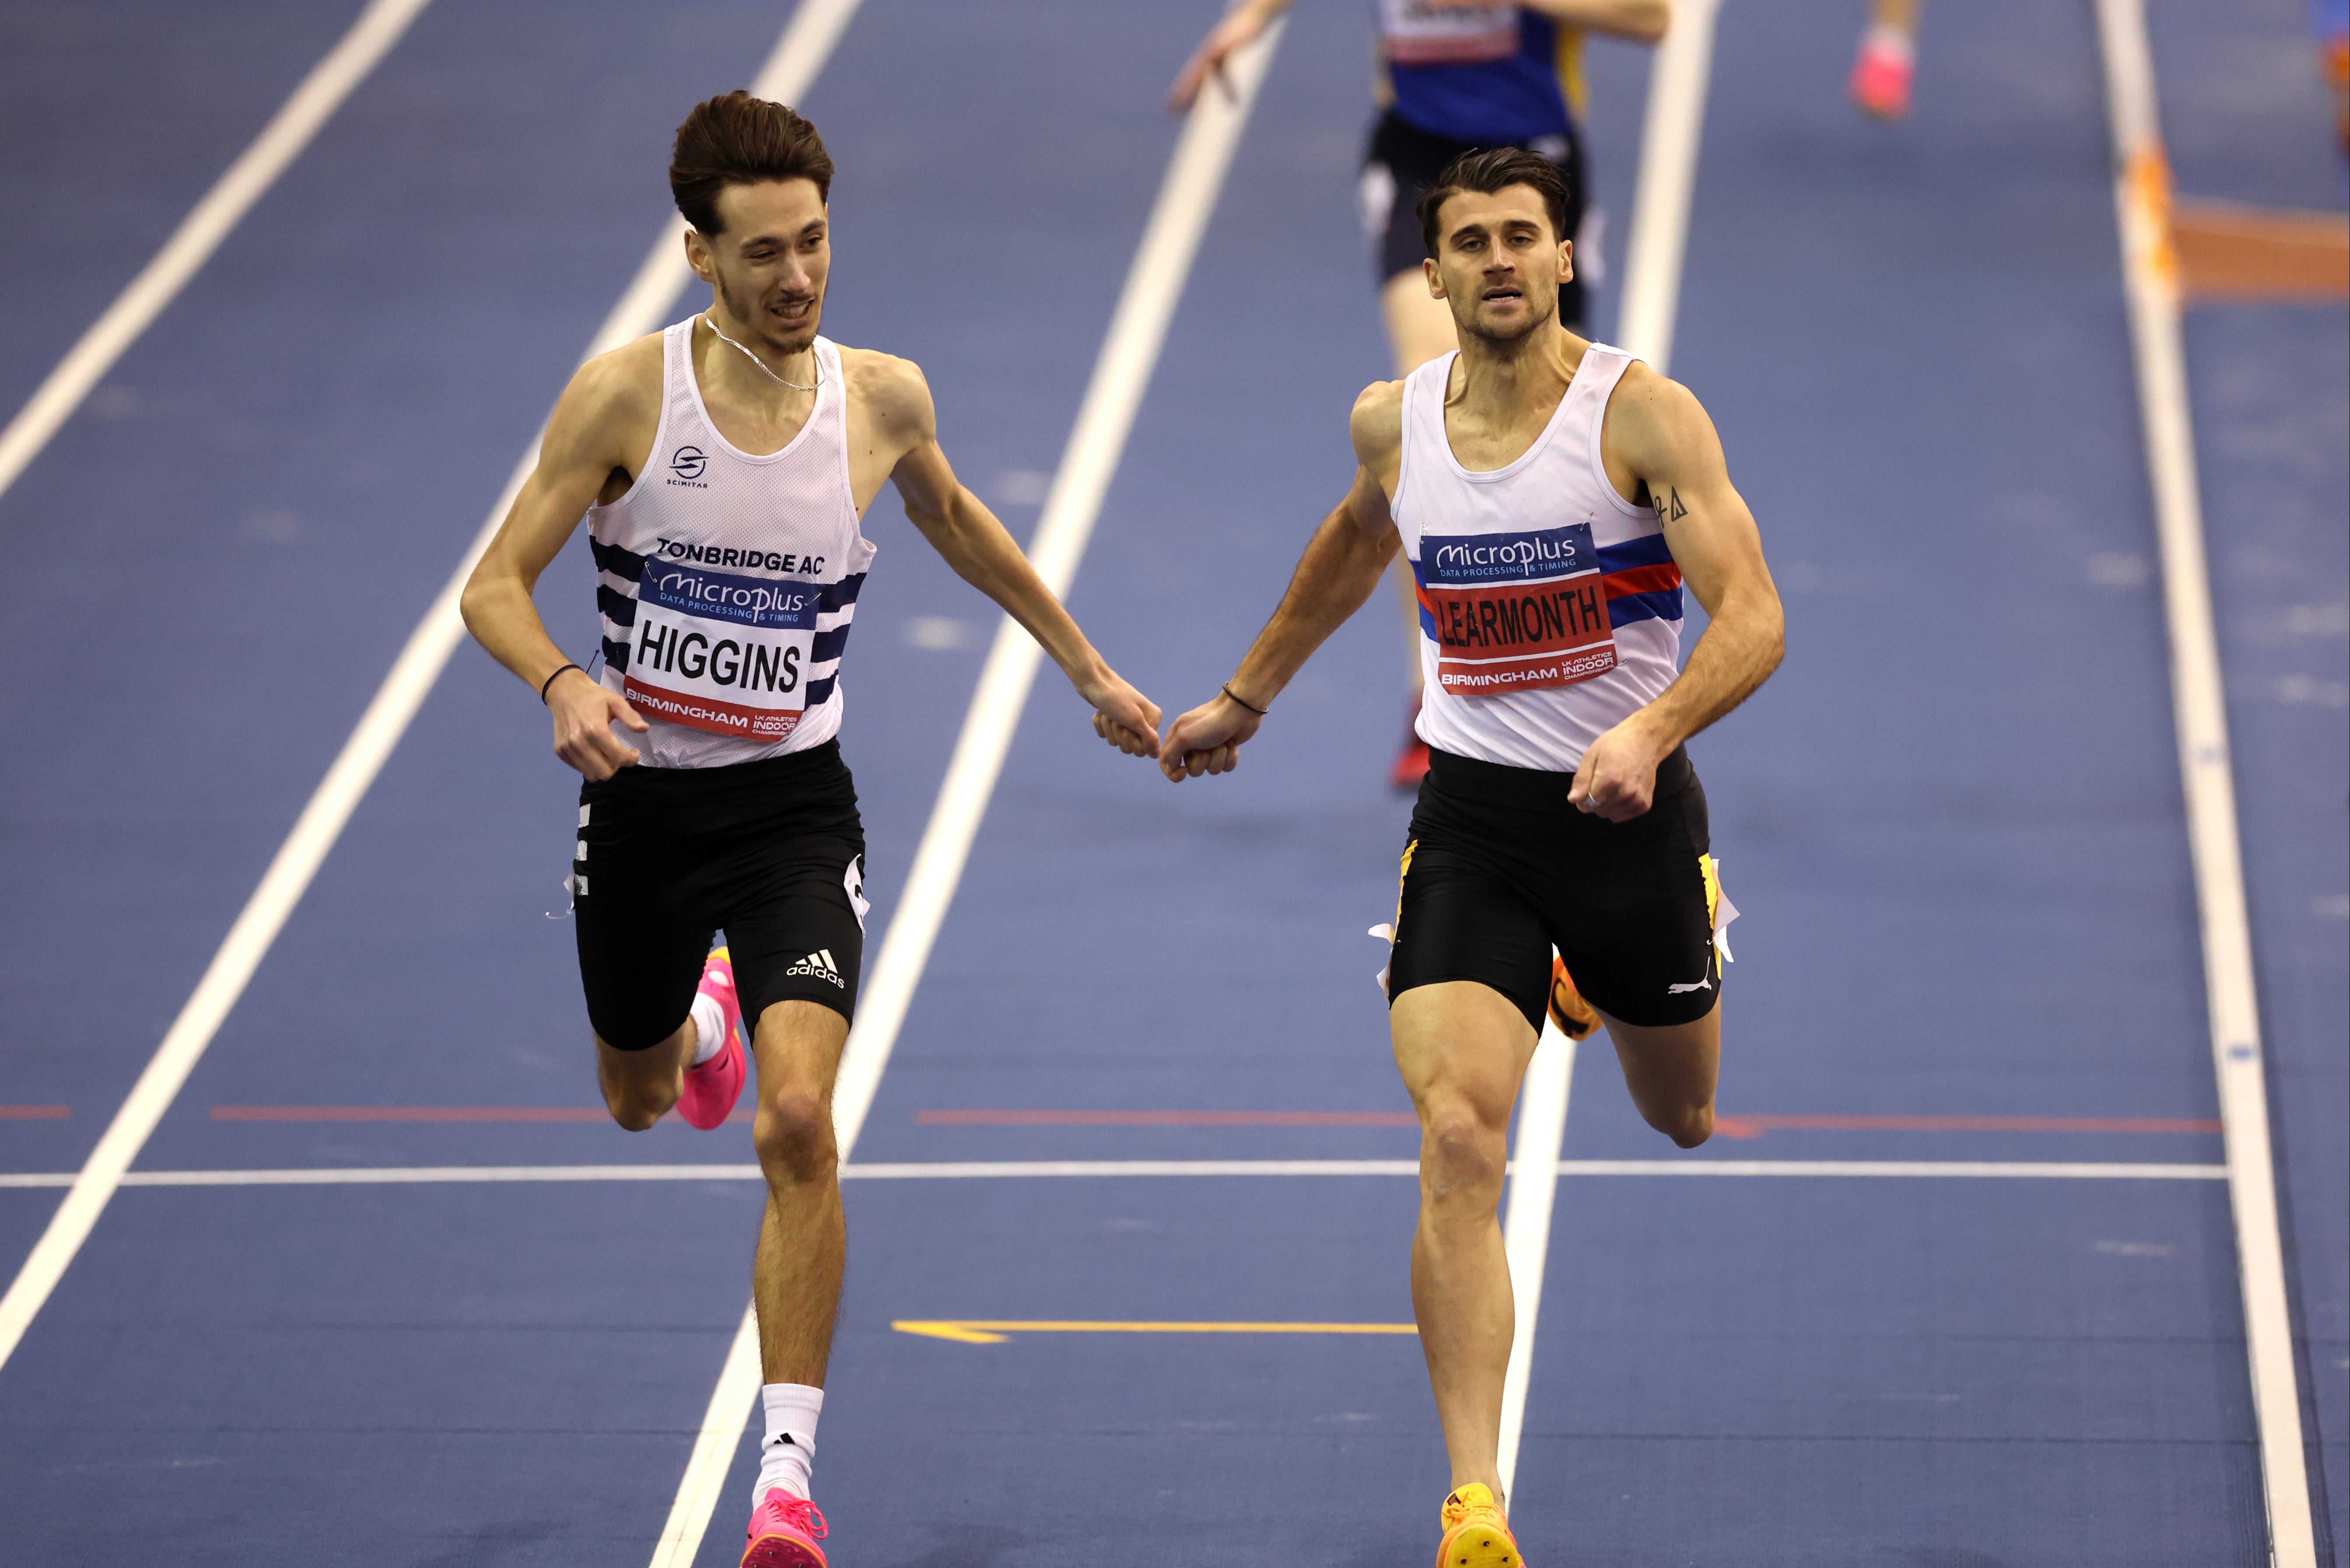 Guy Learmonth (right) was pipped by Jack Higgins at the British Indoor Championships